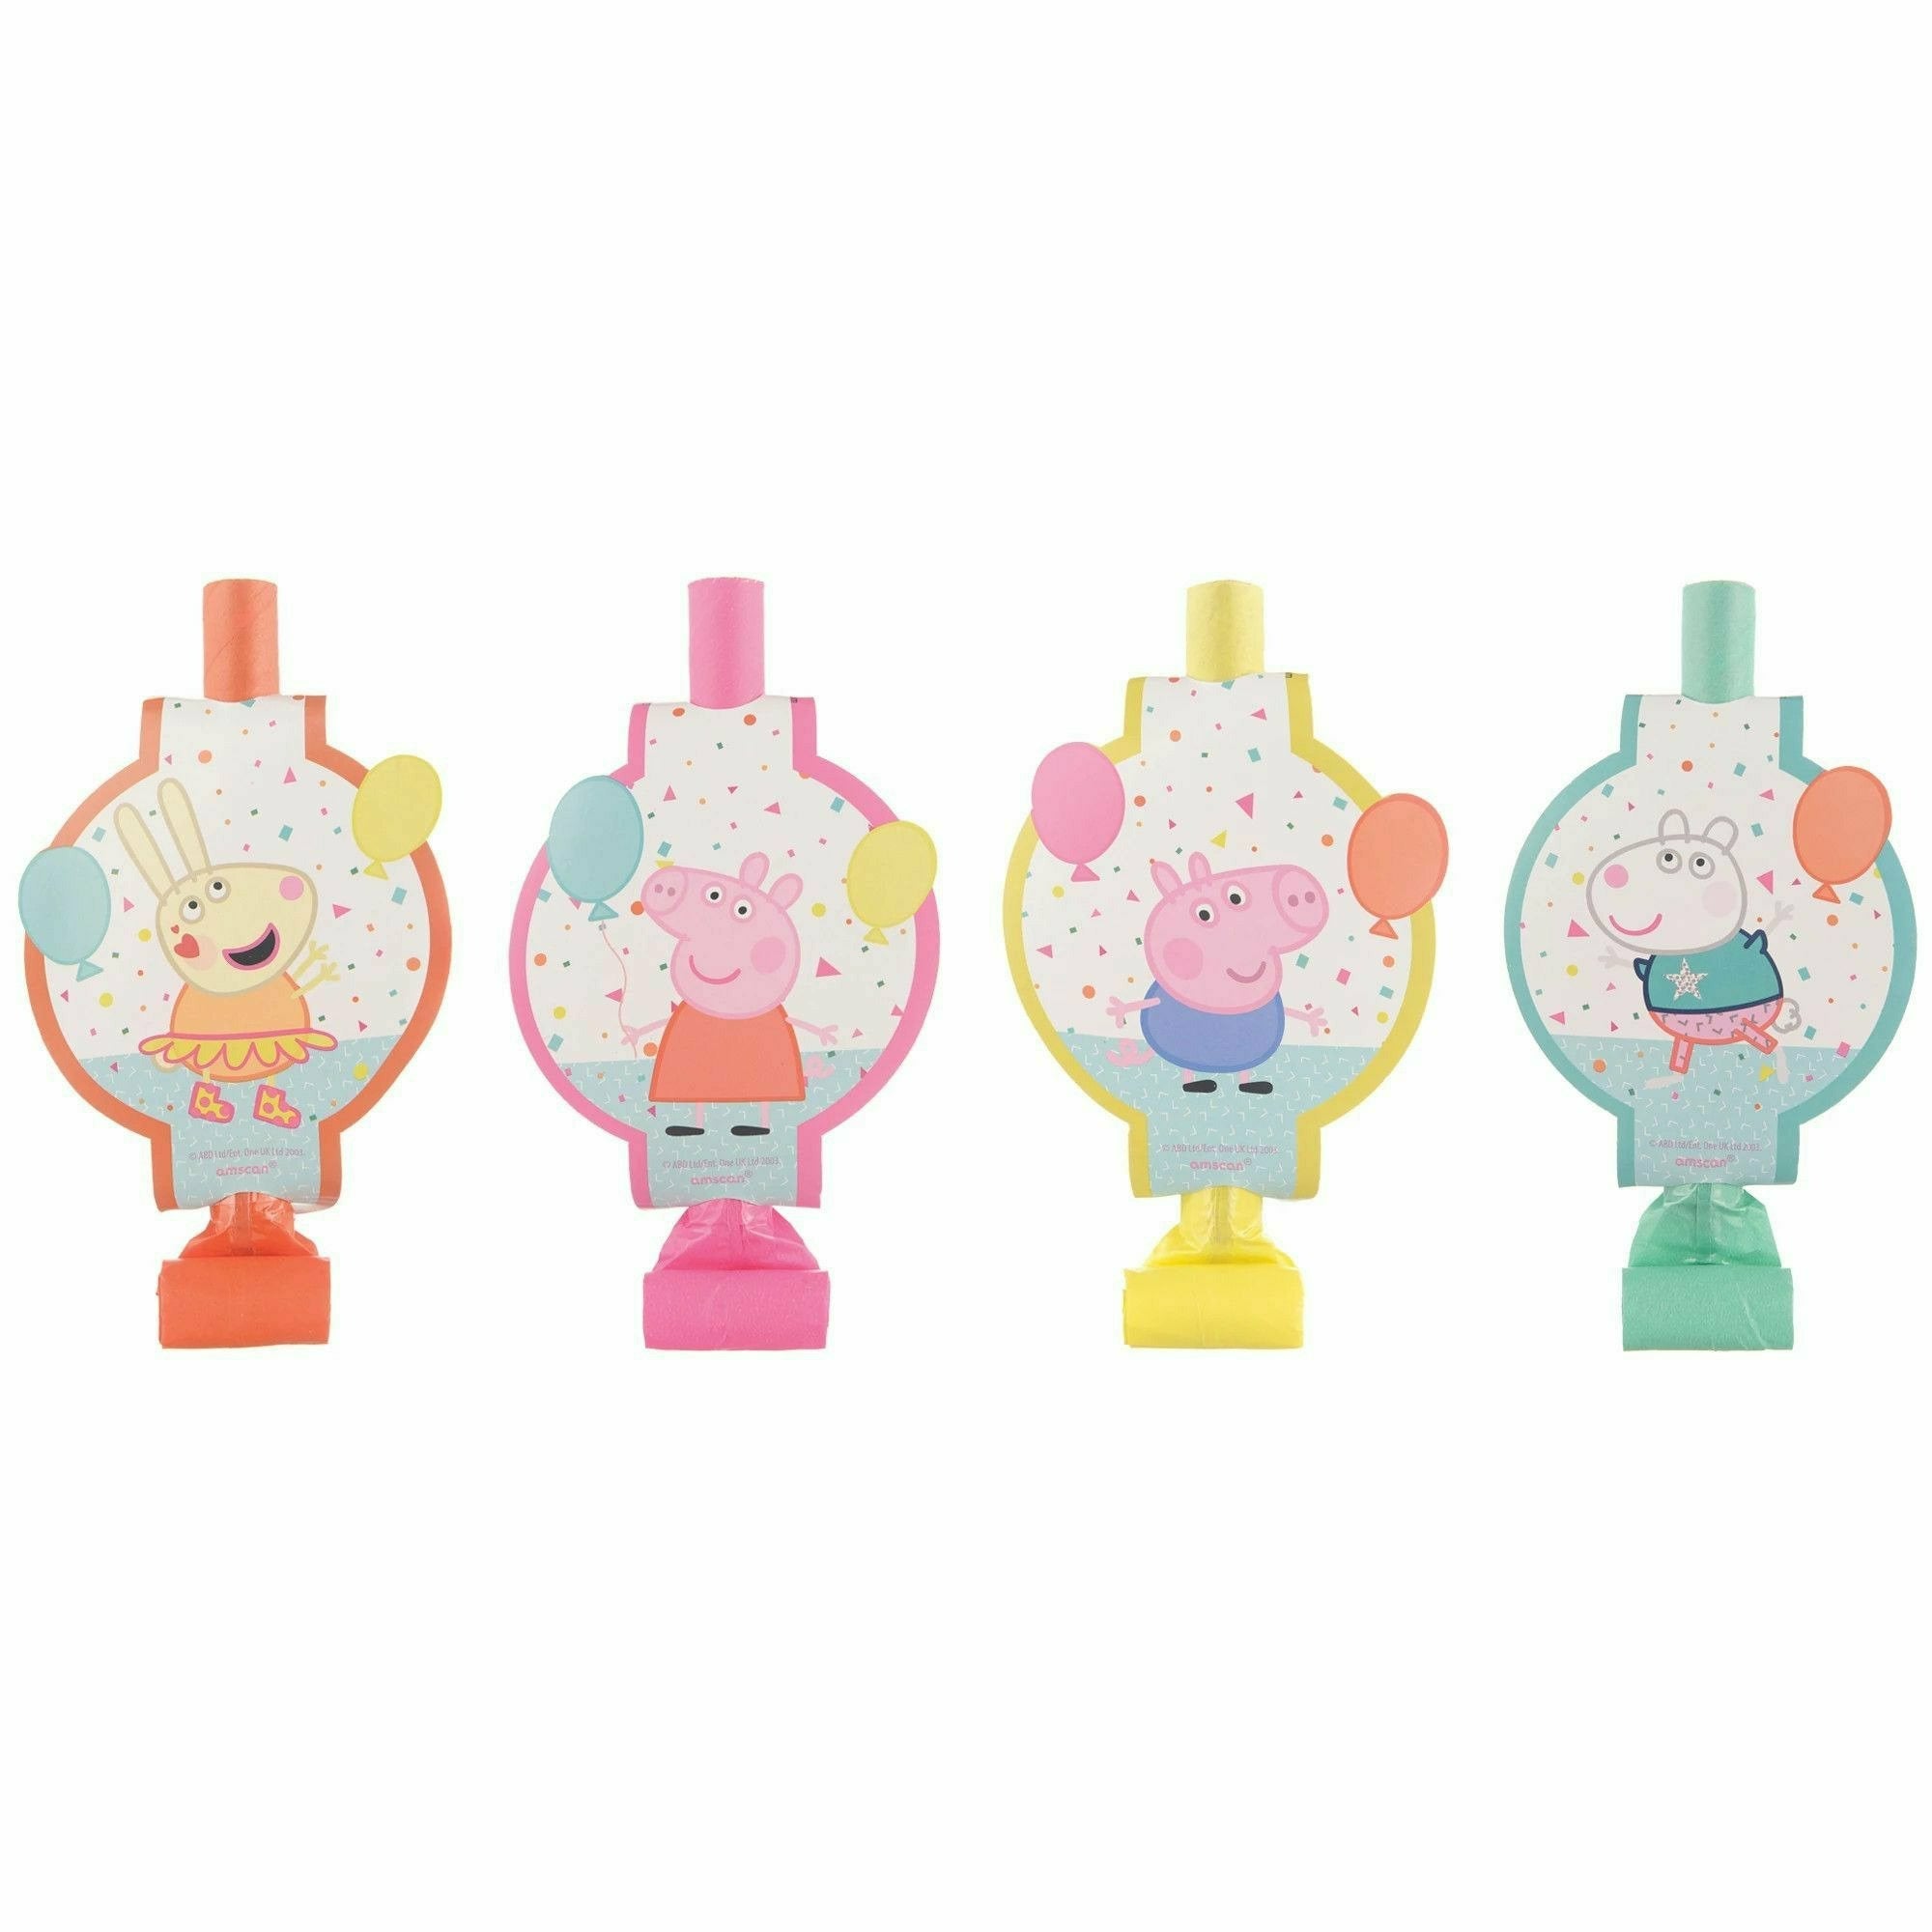 Amscan BIRTHDAY: JUVENILE Peppa Pig Confetti Party Blowouts